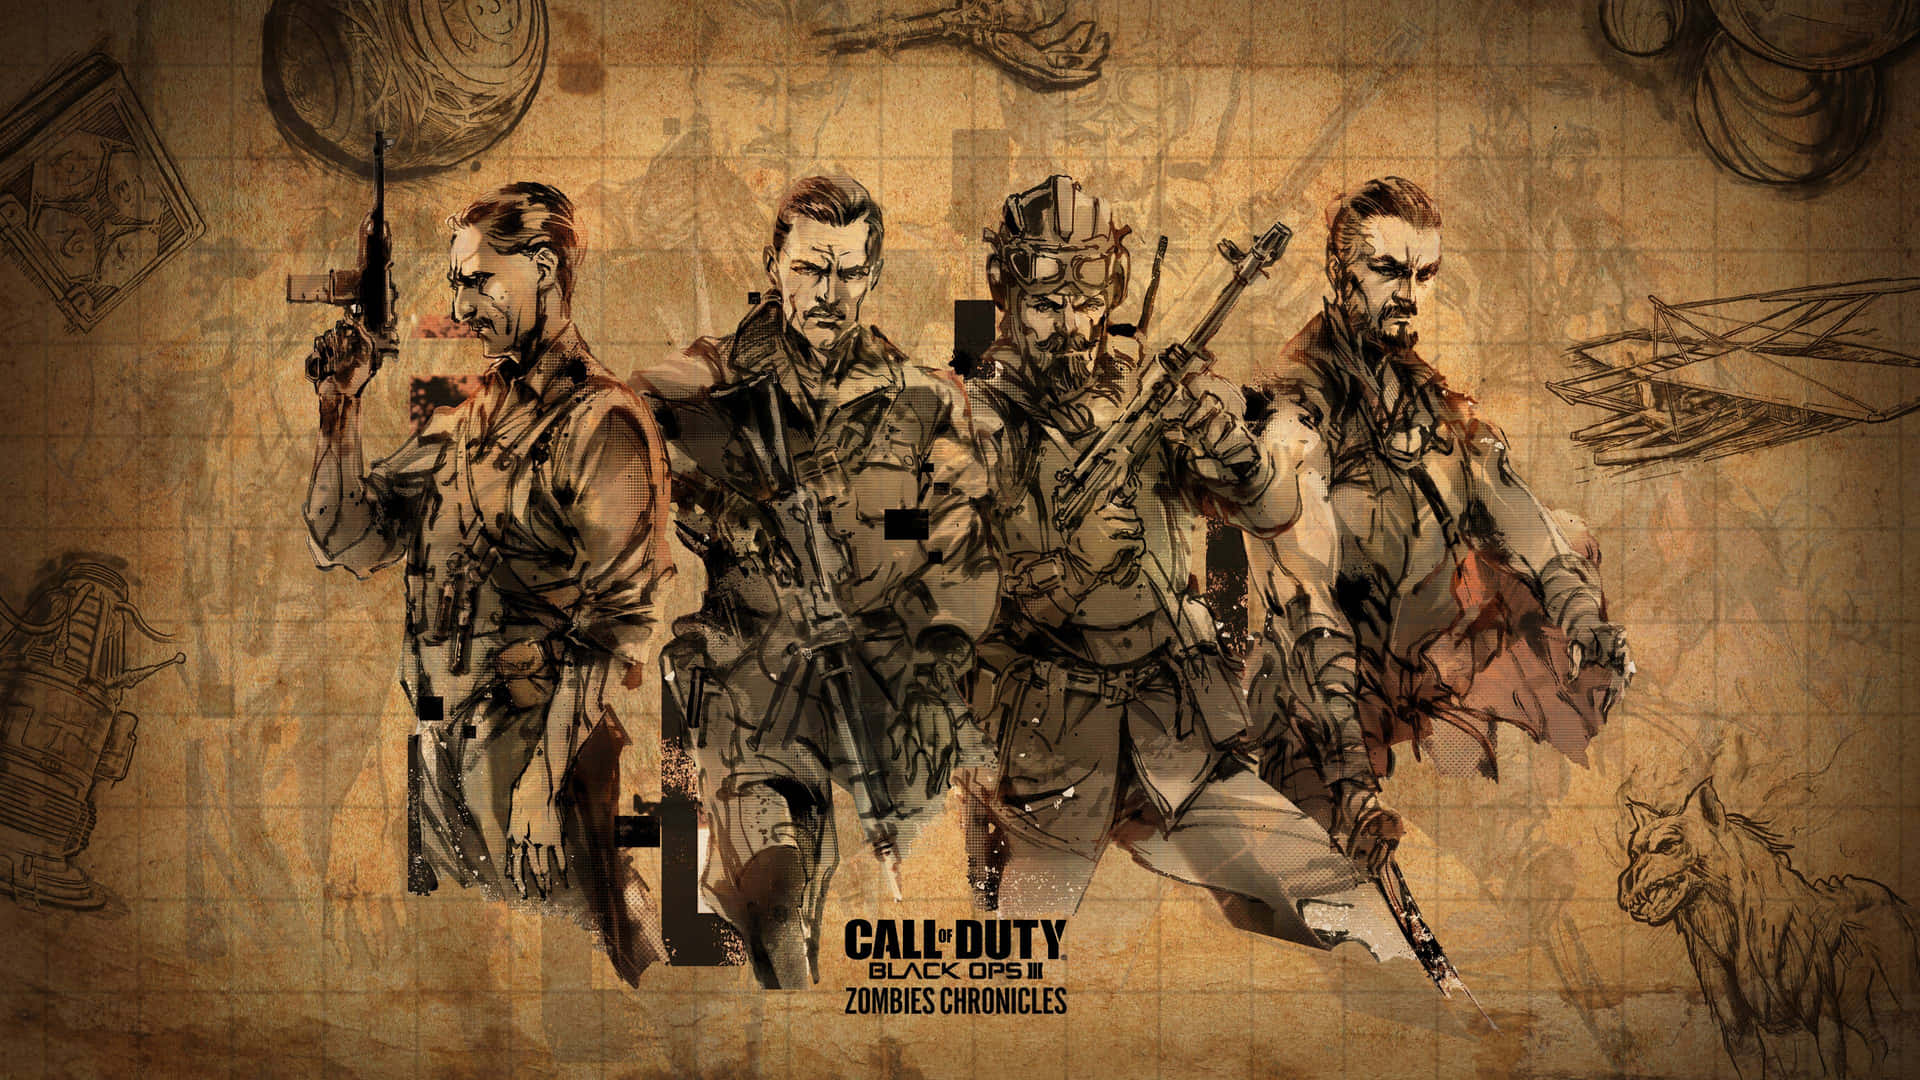 3 Black Ops Zombies Wallpapers on WallpaperDog